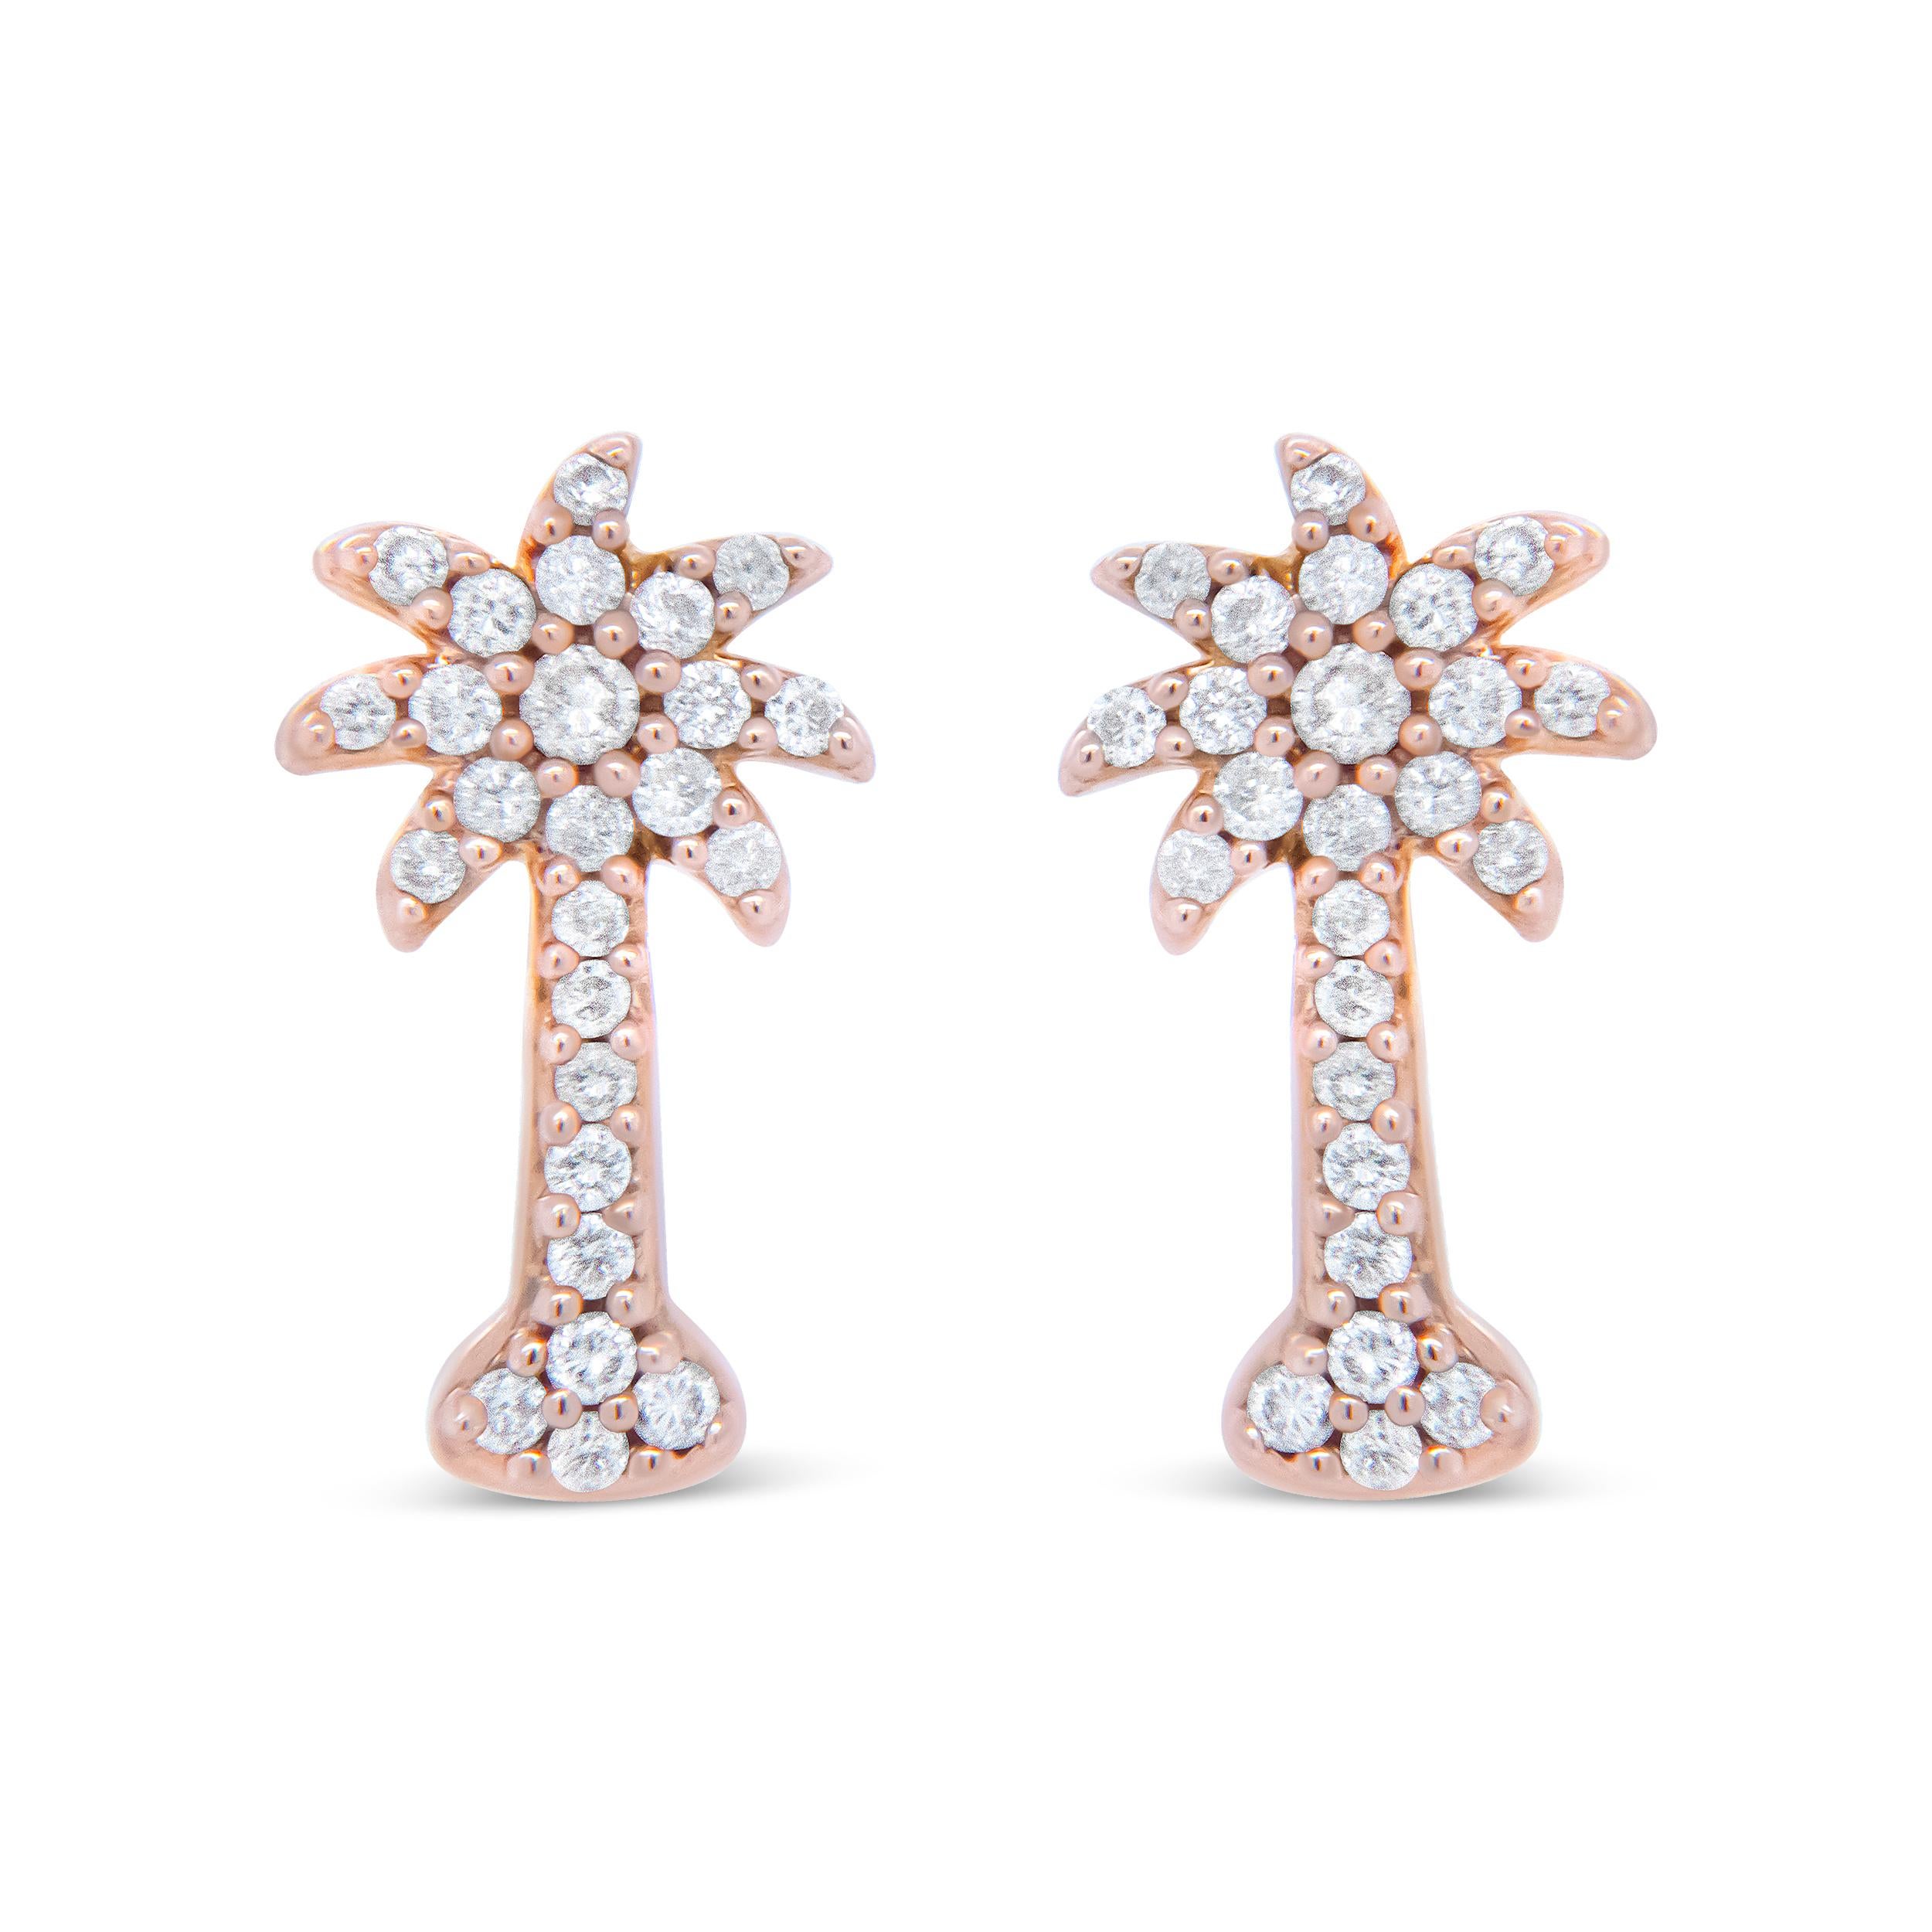 Remind her of the beach with these sparkling and tropical diamond palm tree stud earrings. Crafted in from warm 10k rose gold, each shimmering earring features a gleaming trunk and dazzling shady fronds. Radiant with 1/4ct. t.w. of diamonds and a